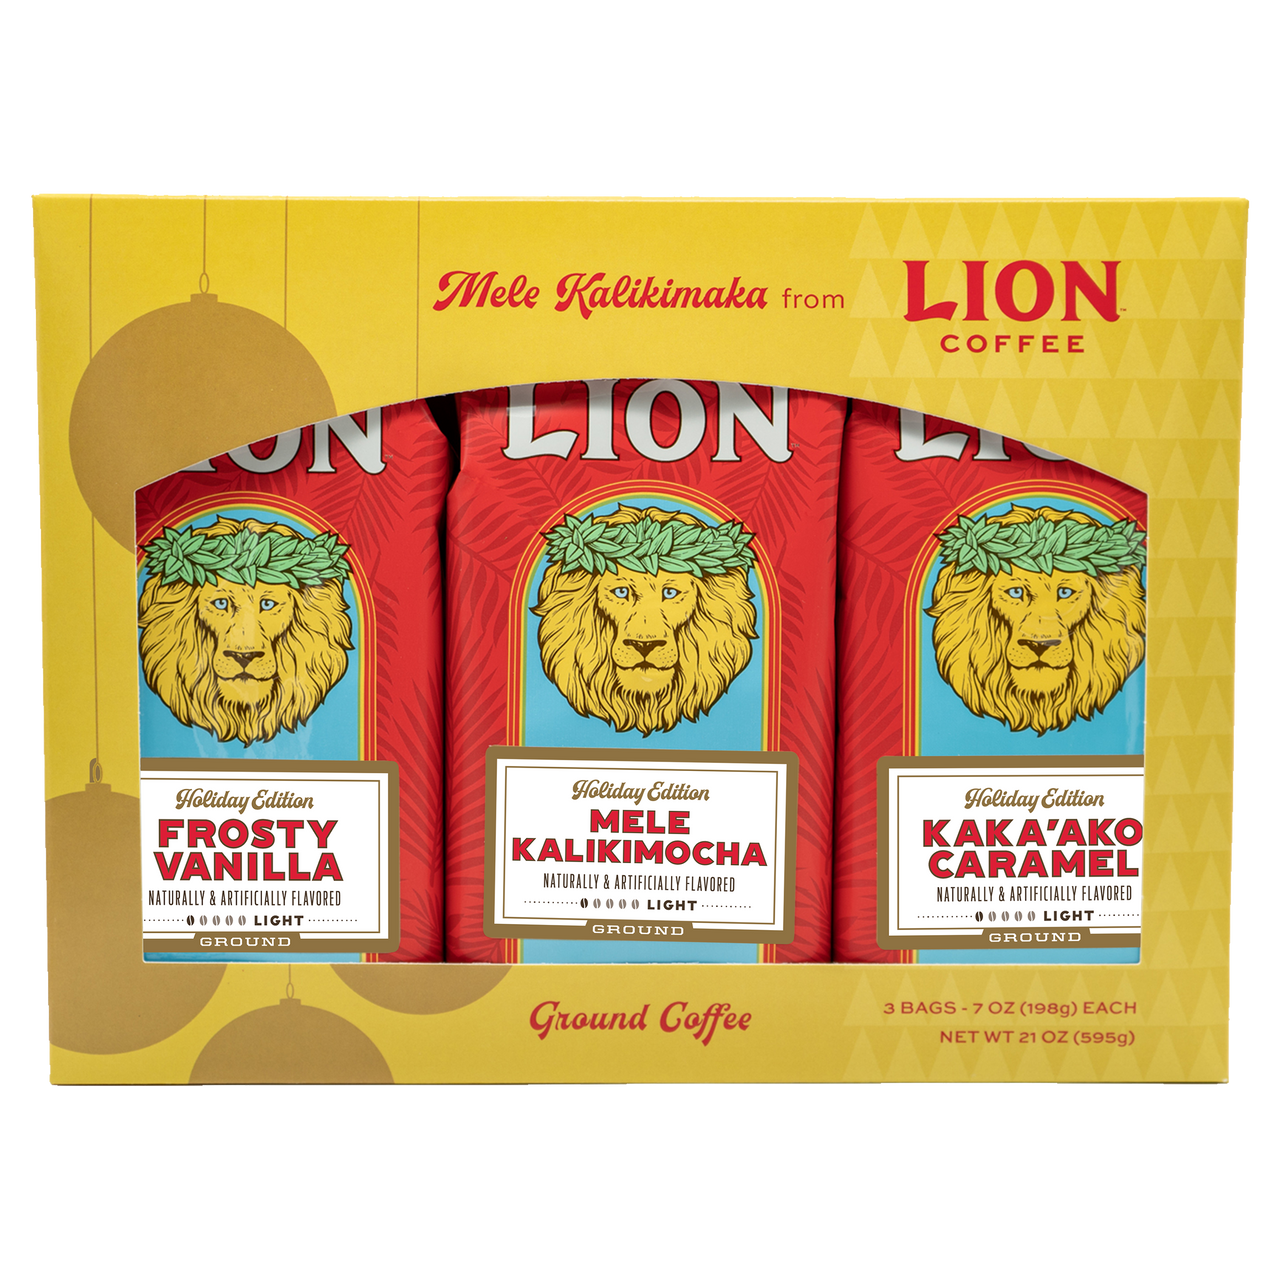 https://cdn11.bigcommerce.com/s-9wlsnri4bn/images/stencil/1280x1280/products/330/1144/2023_lion_holiday_gift_set__01306.1695084972.png?c=1